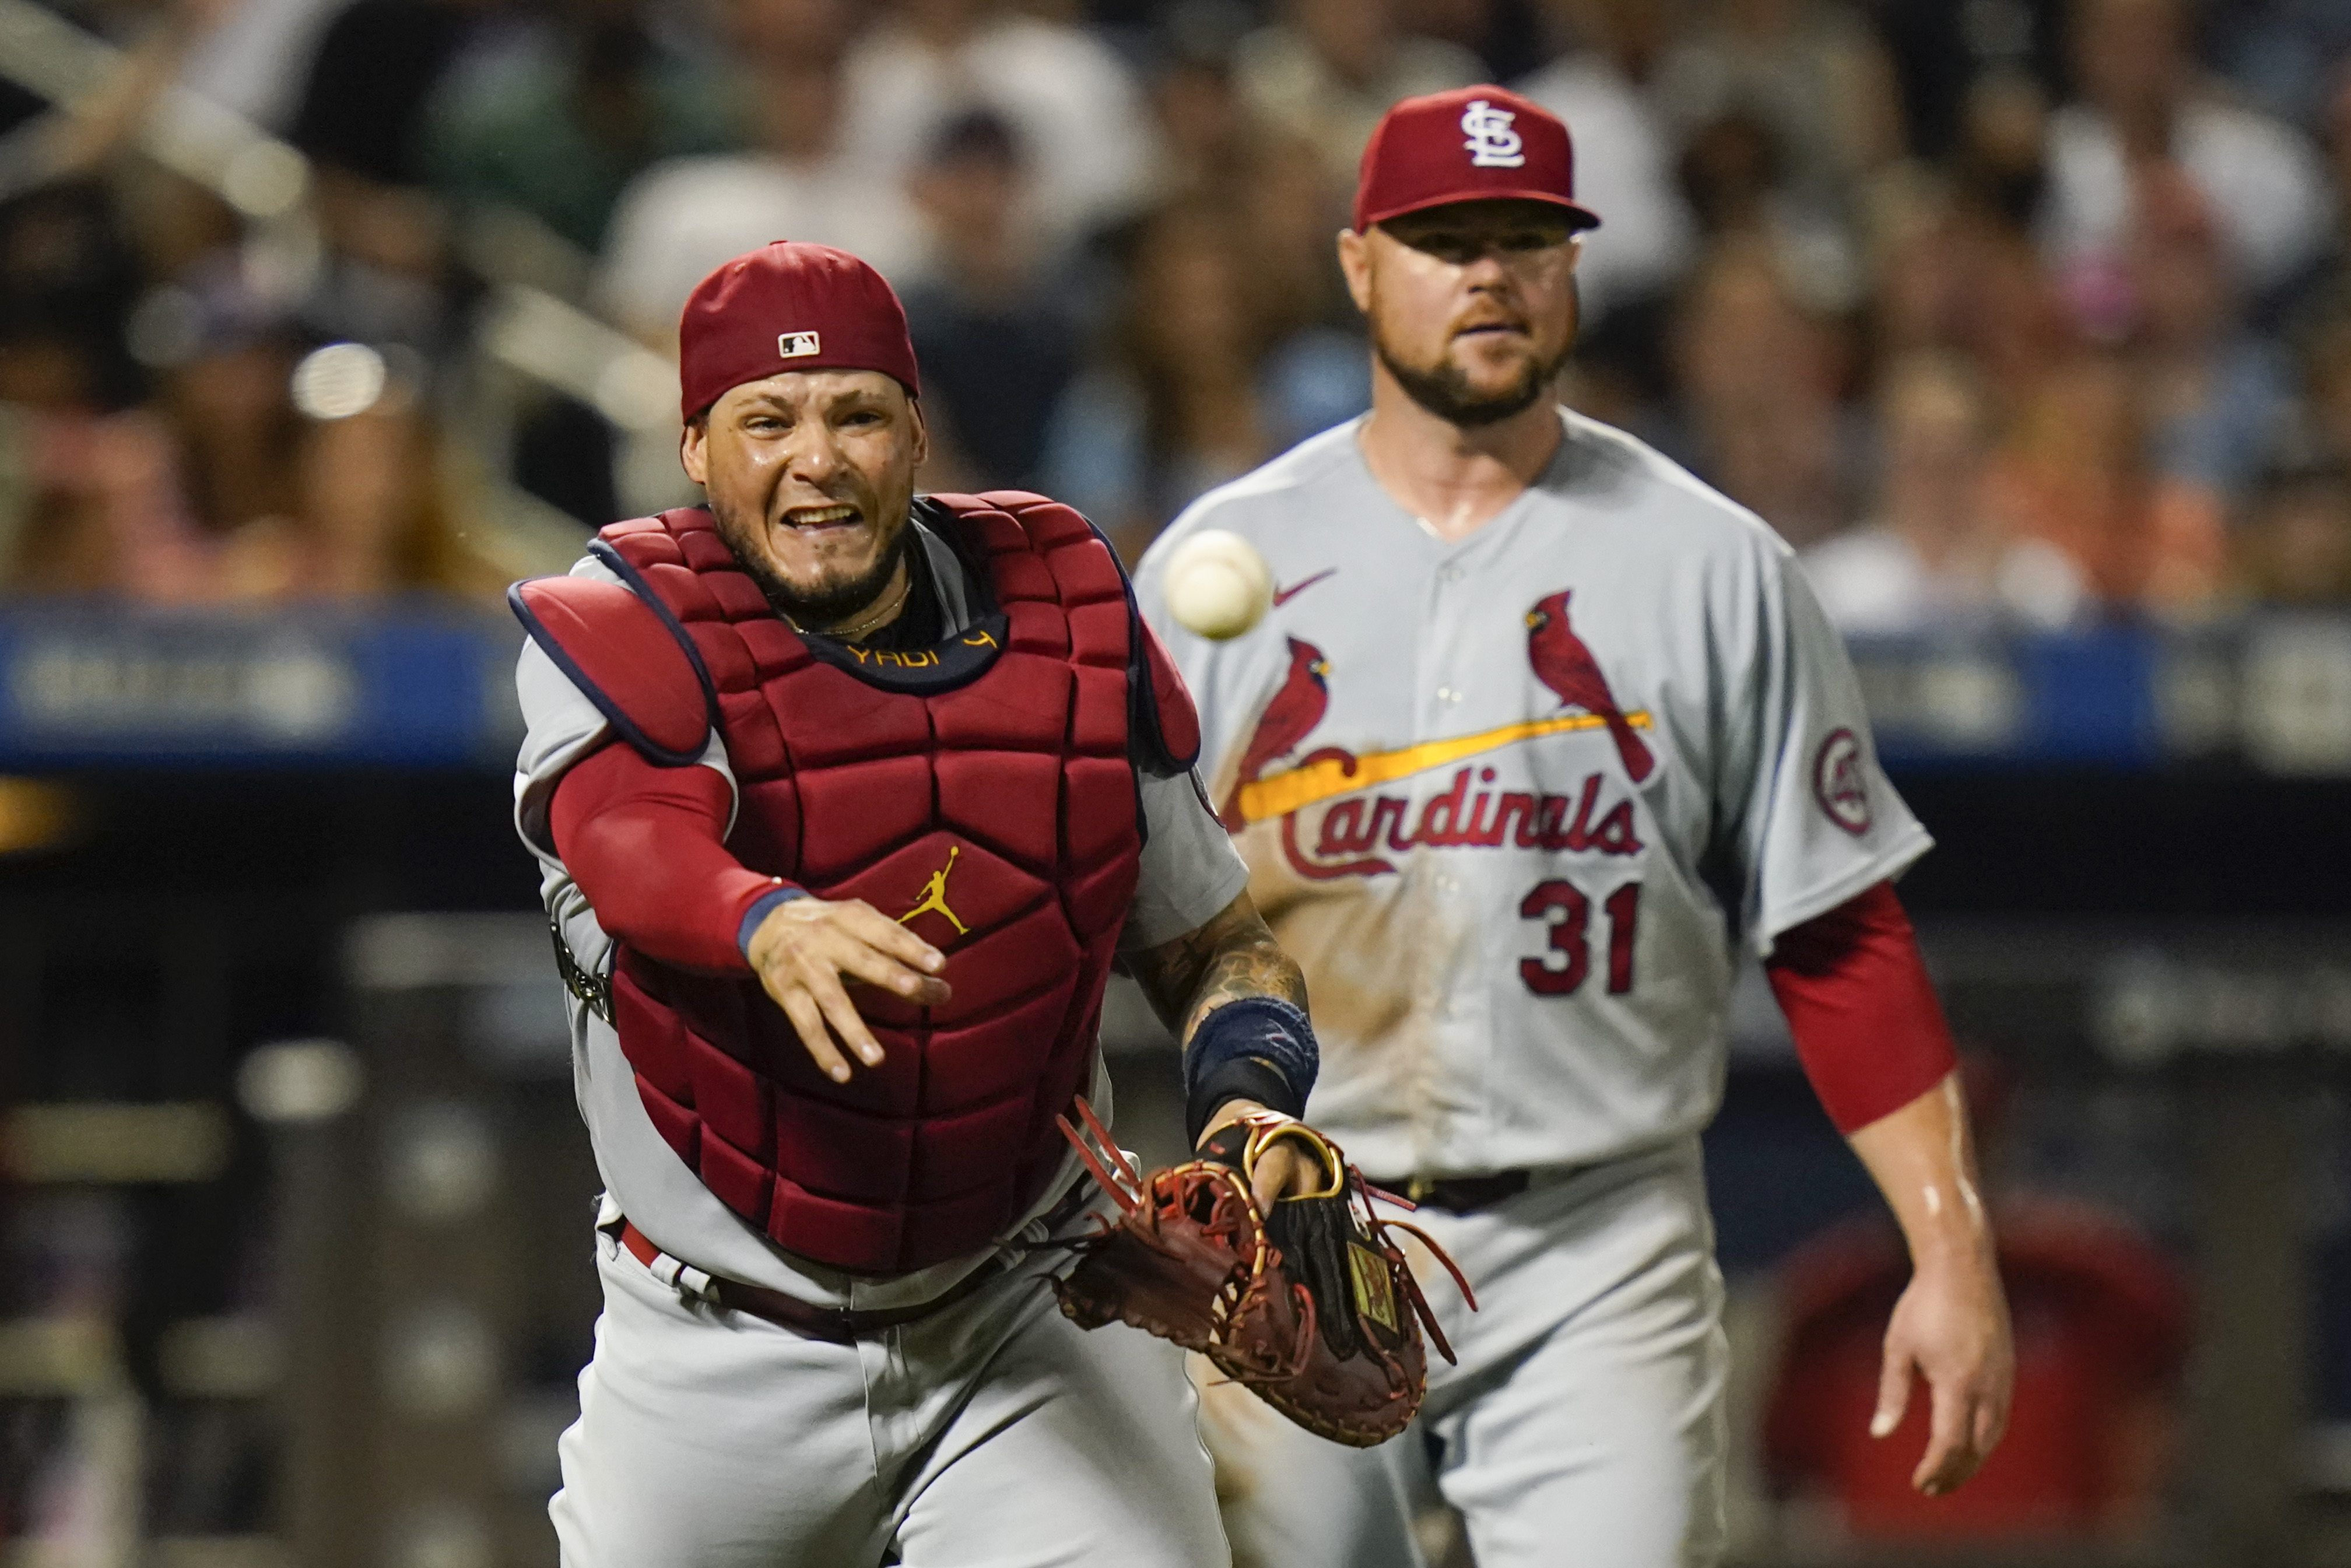 St. Louis Cardinals catcher Yadier Molina throws the baseball in